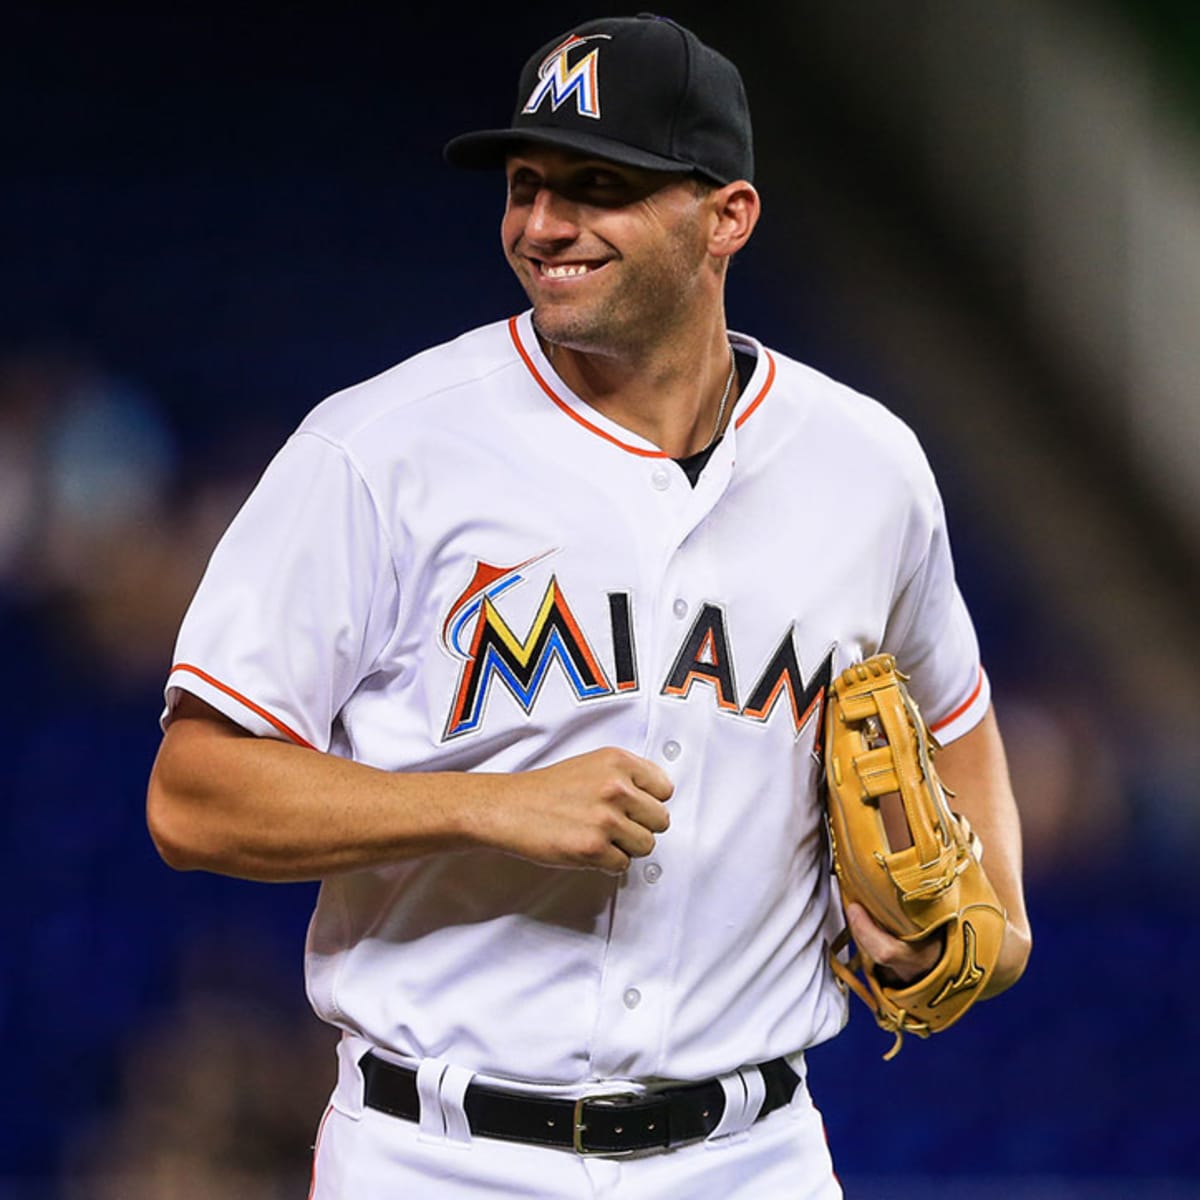 Braves broadcaster Jeff Francoeur is getting his own 'Frenchy